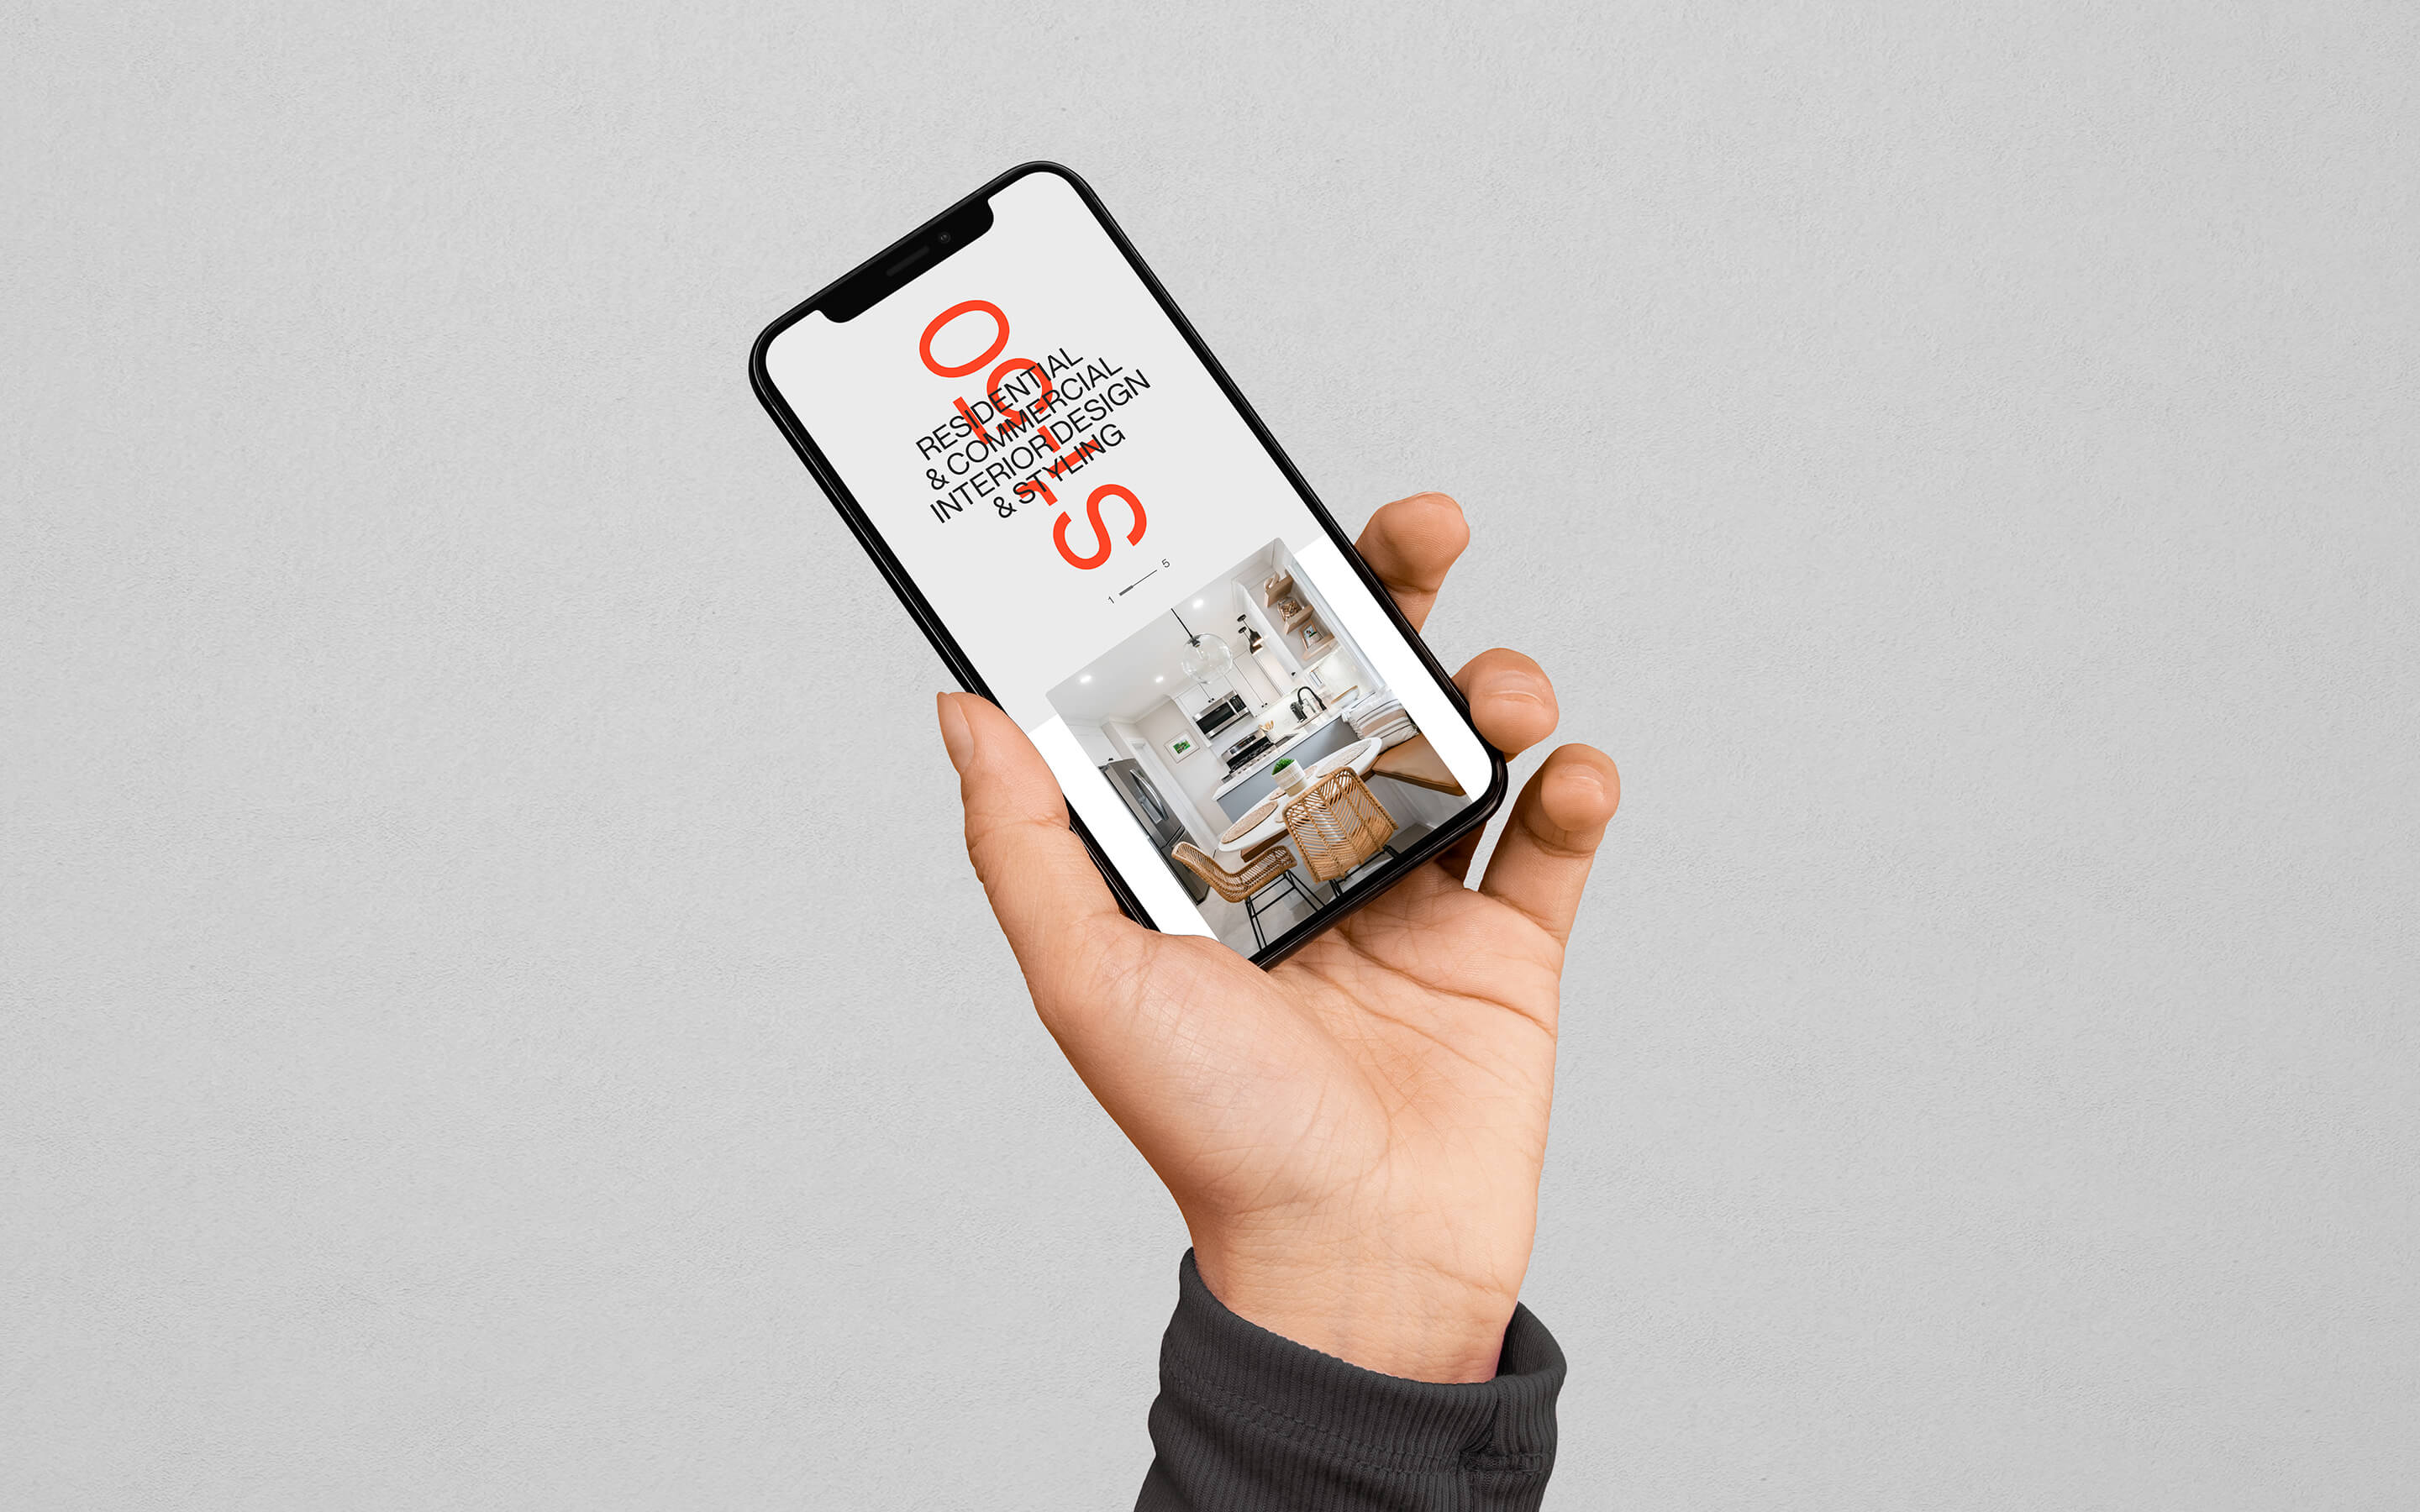 Studio One-Fifty website's displayed on an iPhone